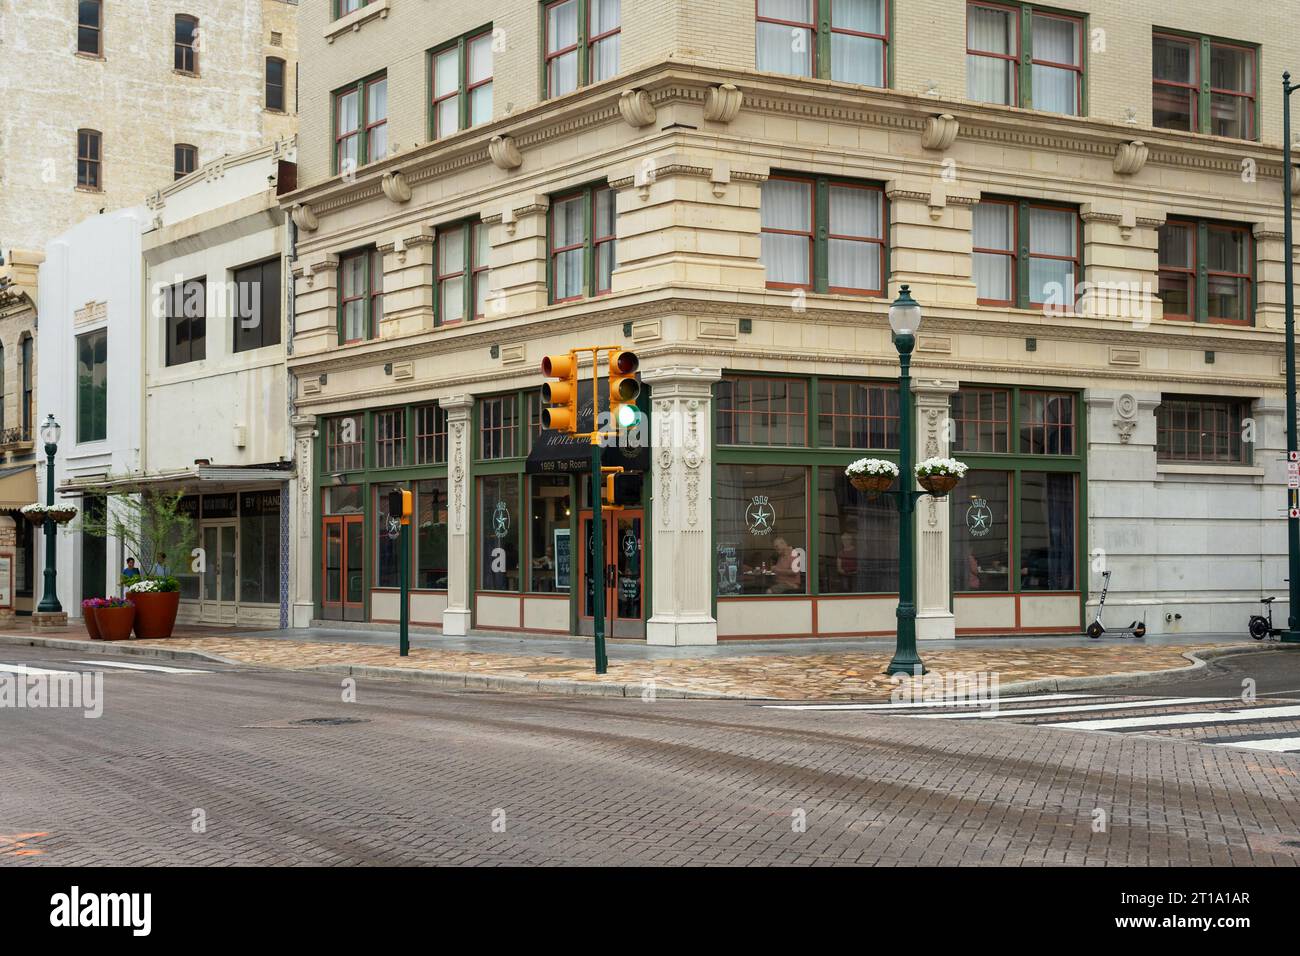 San Antonio, Texas, USA – May 9, 2023: Street view of the 1909 Tap Room located in The Hotel Gibbs building in downtown San Antonio, Texas. Stock Photo